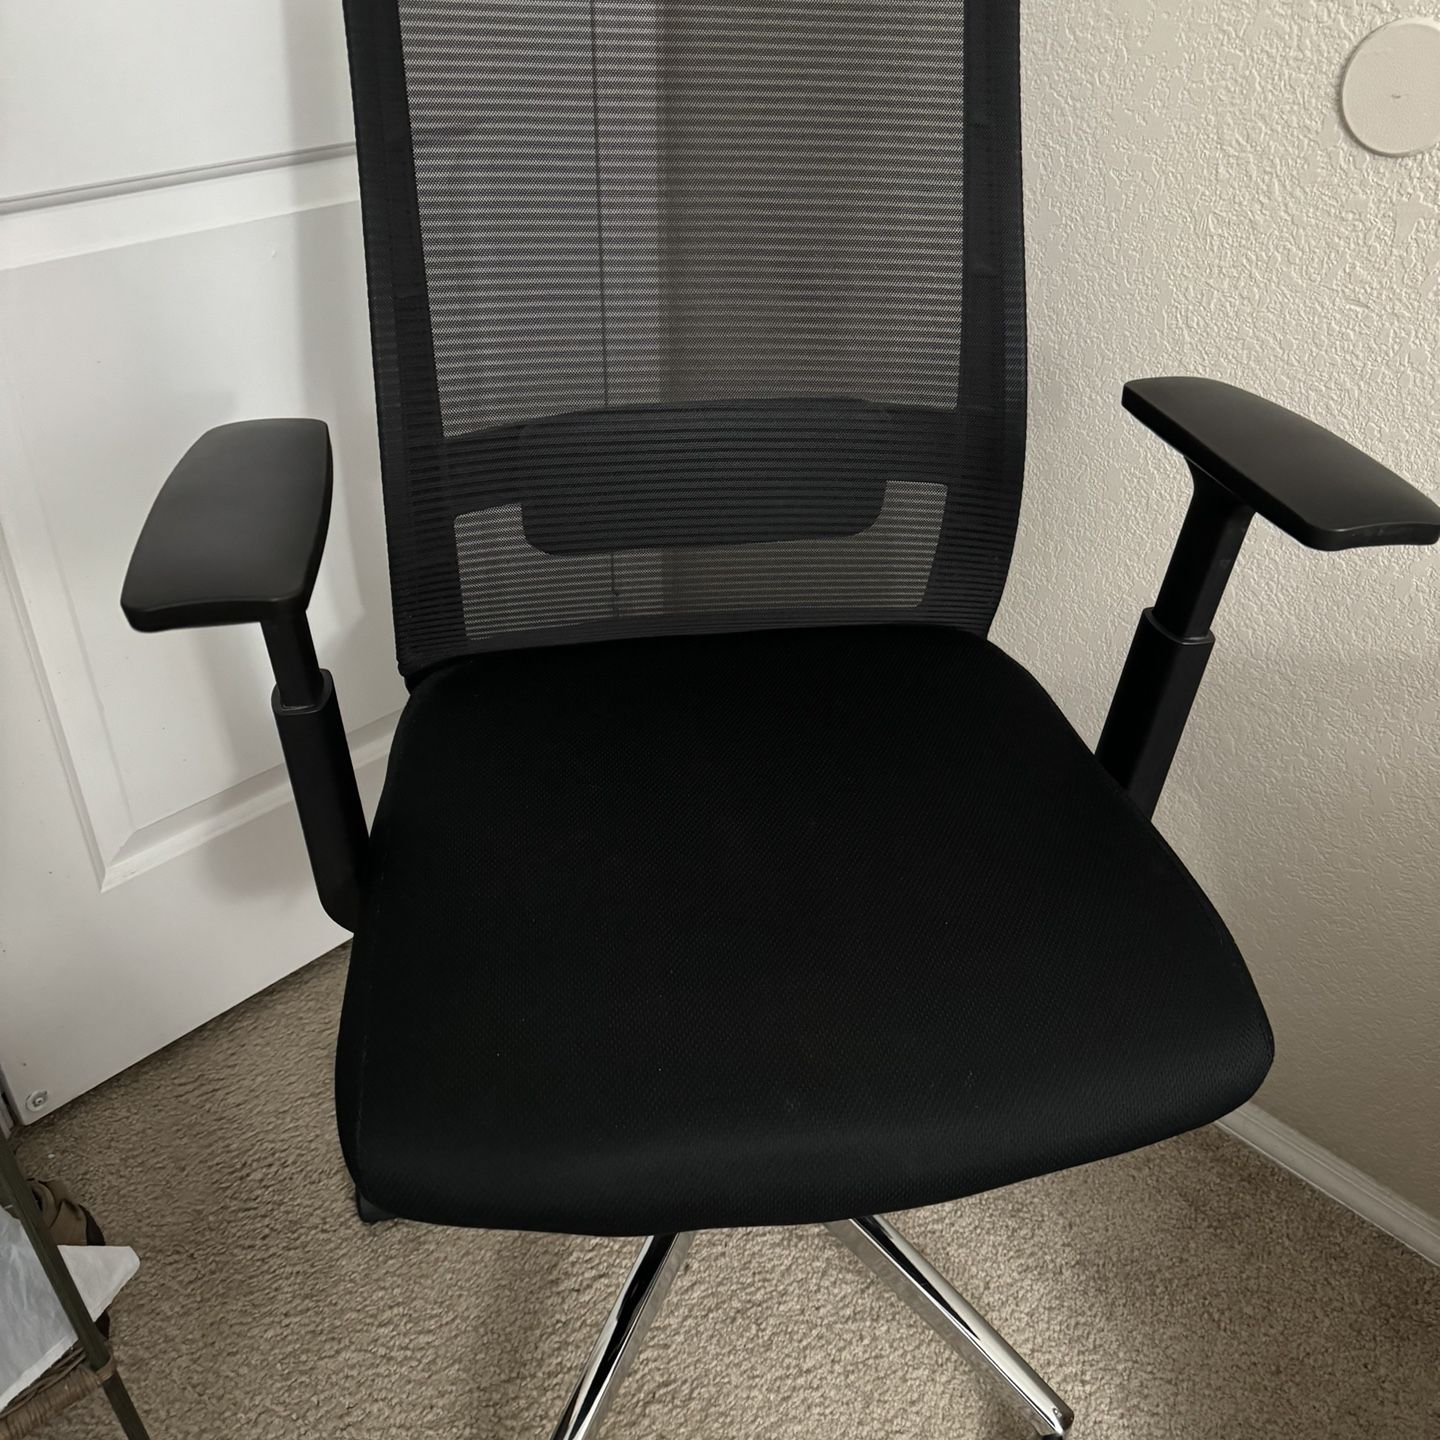 Revolving chair | Work Chair | Working Perfectly